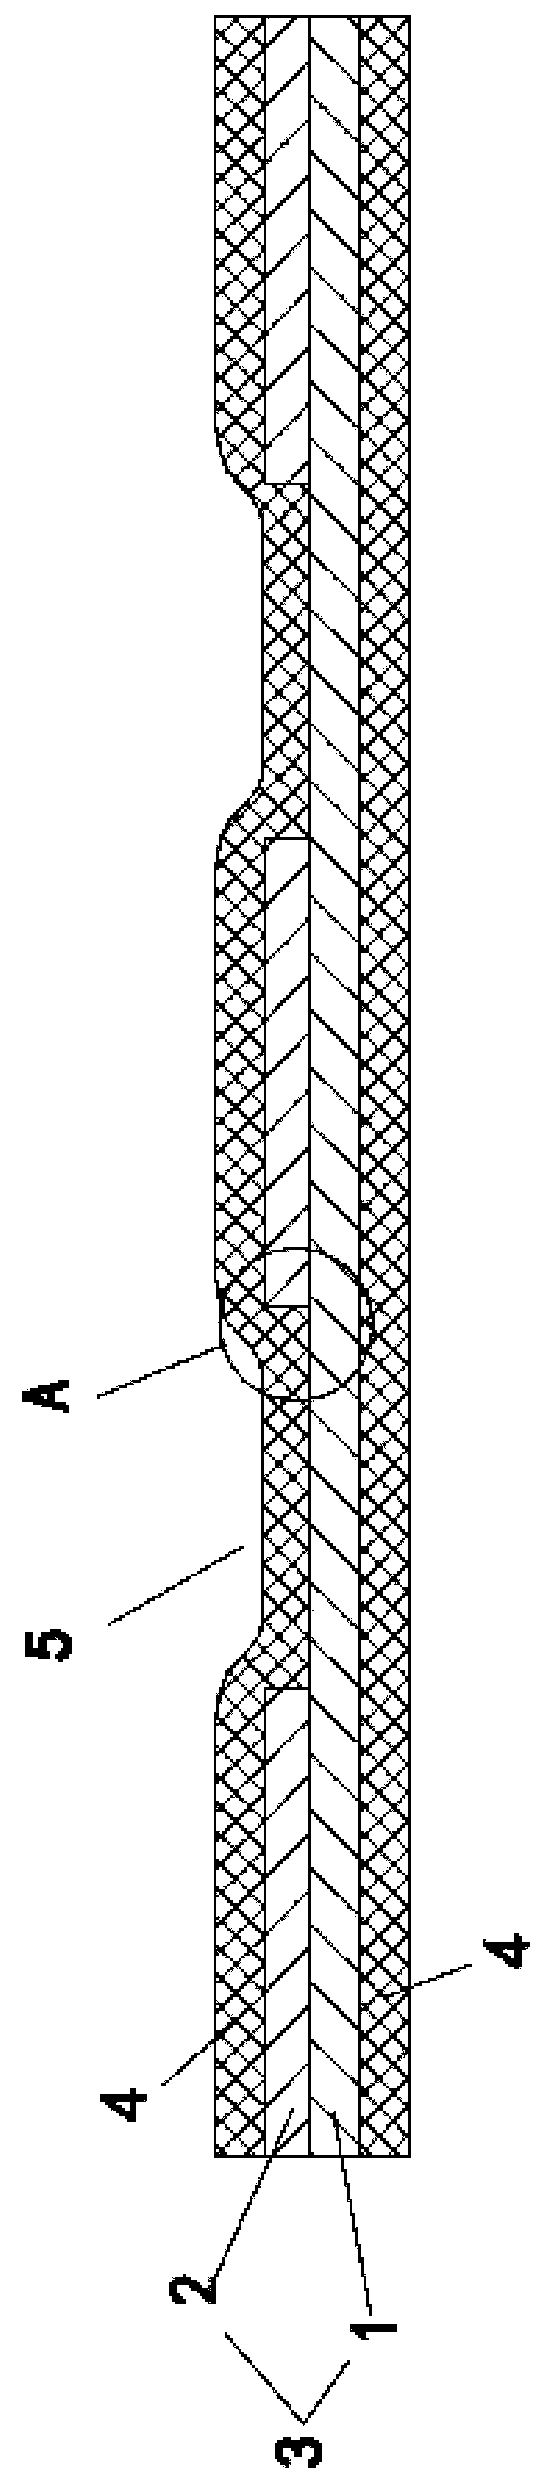 Direct dry-film adhering process for hollowed-out region of hollowed-out flexible circuit board